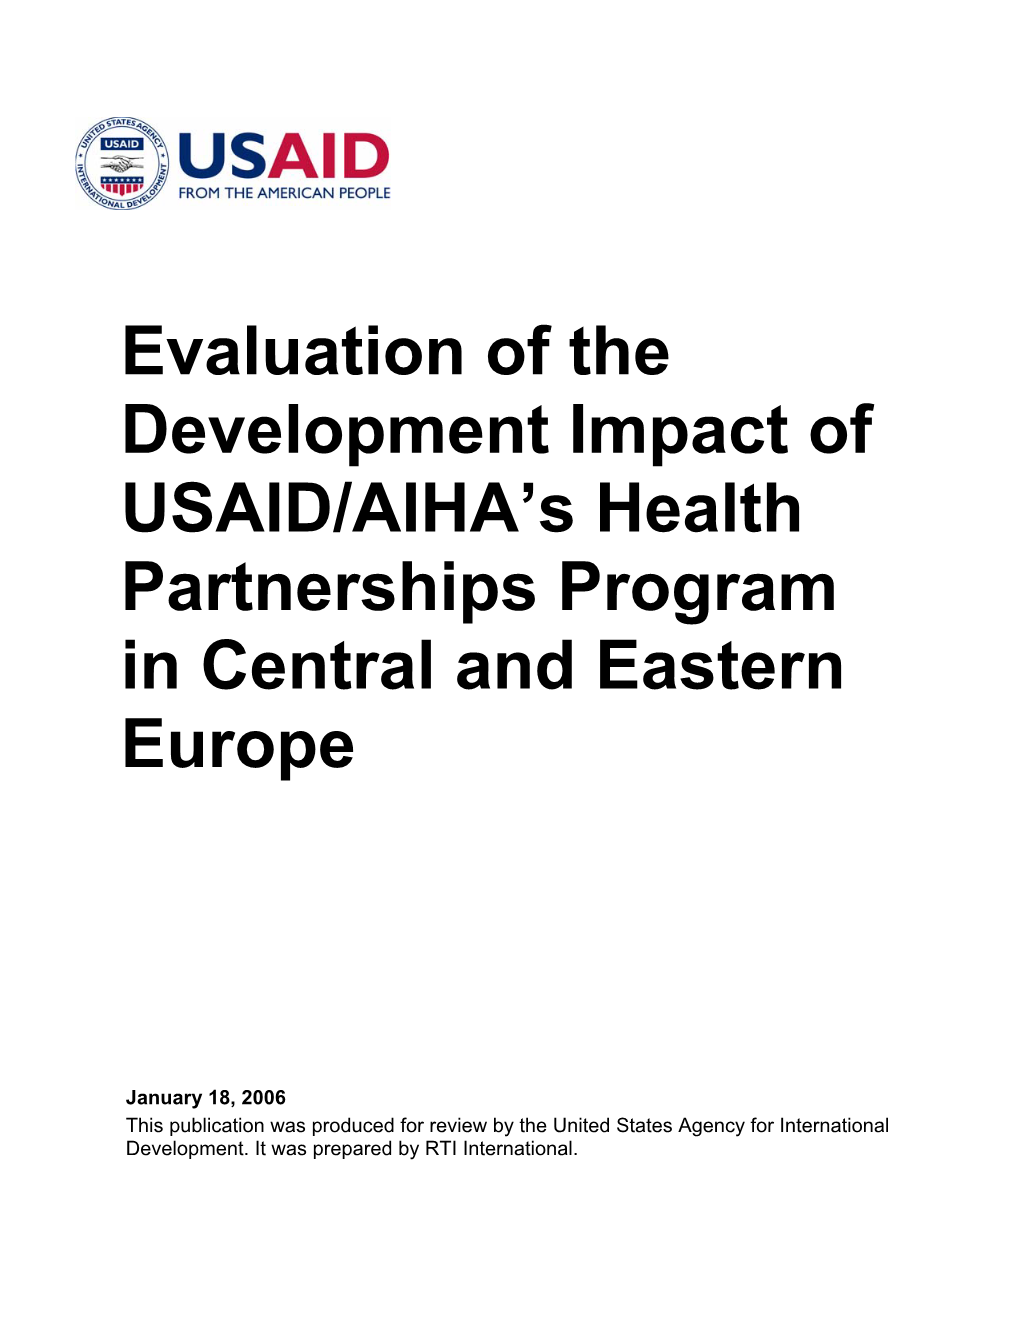 USAID/RTI Evaluation Report of AIHA Partnerships in Central and Eastern Europe